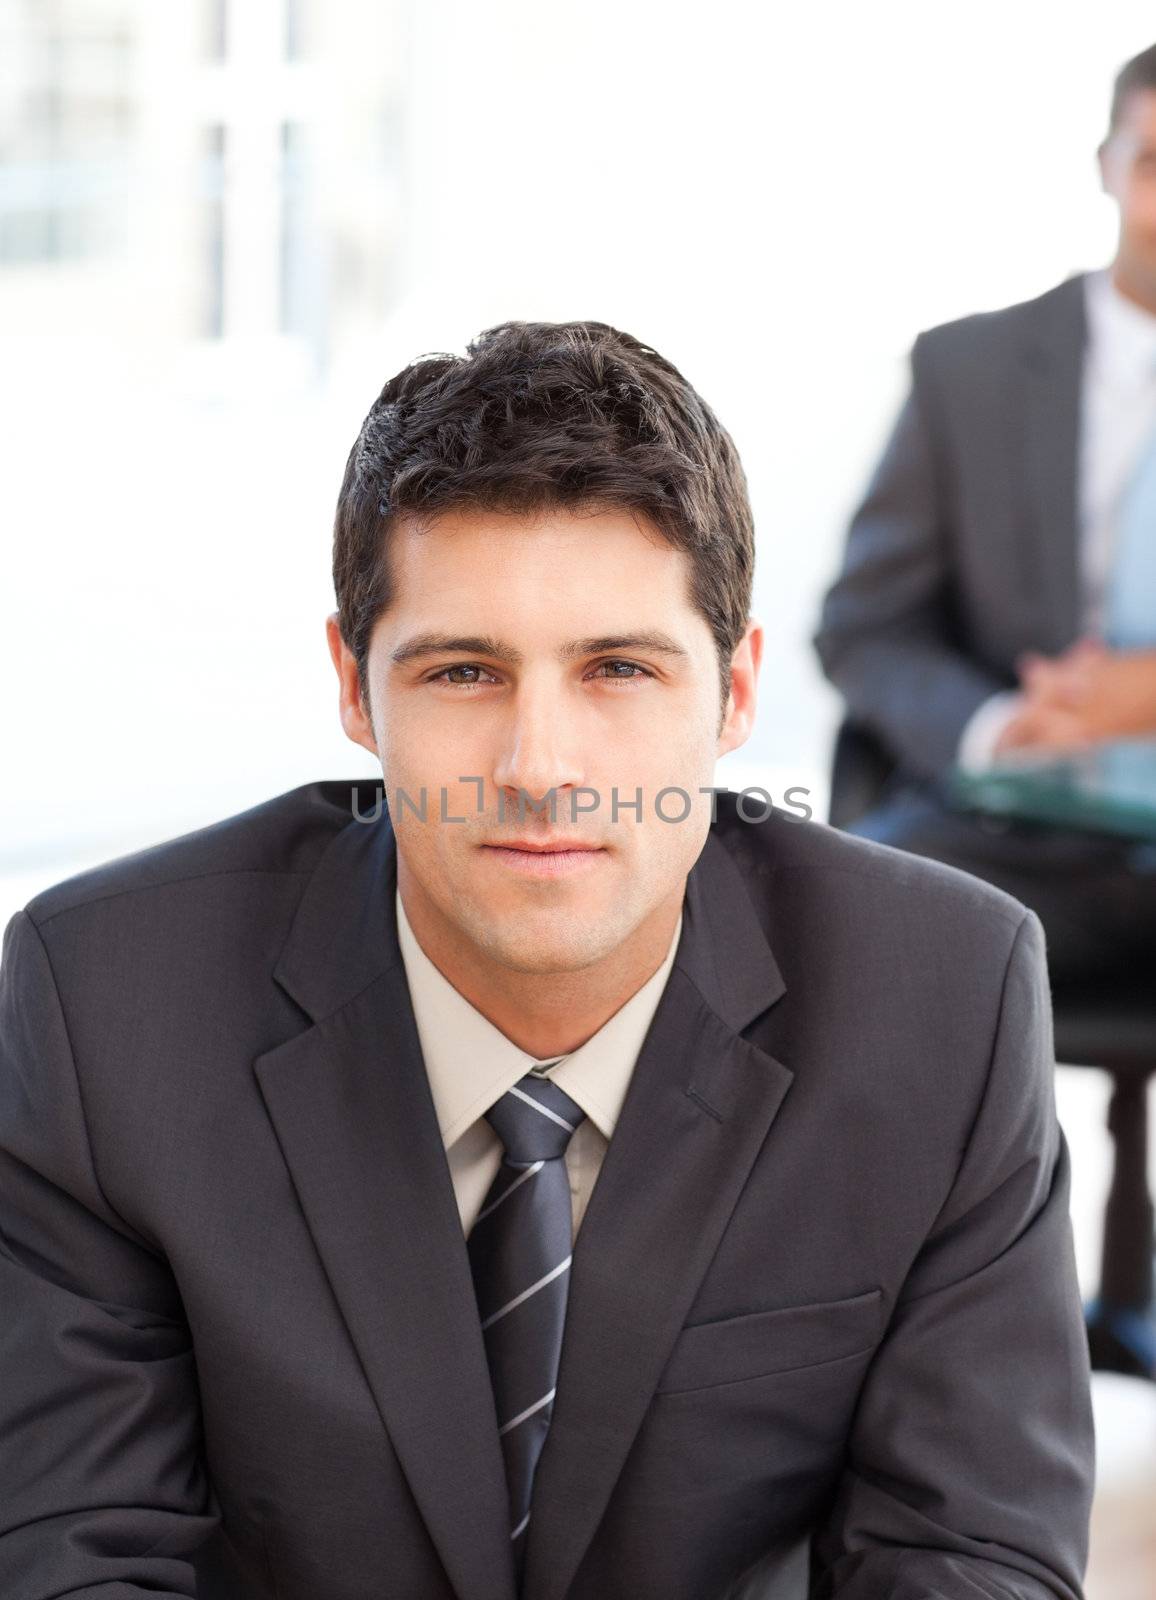 Serious businessman during an interview with a co-worker waiting in the background